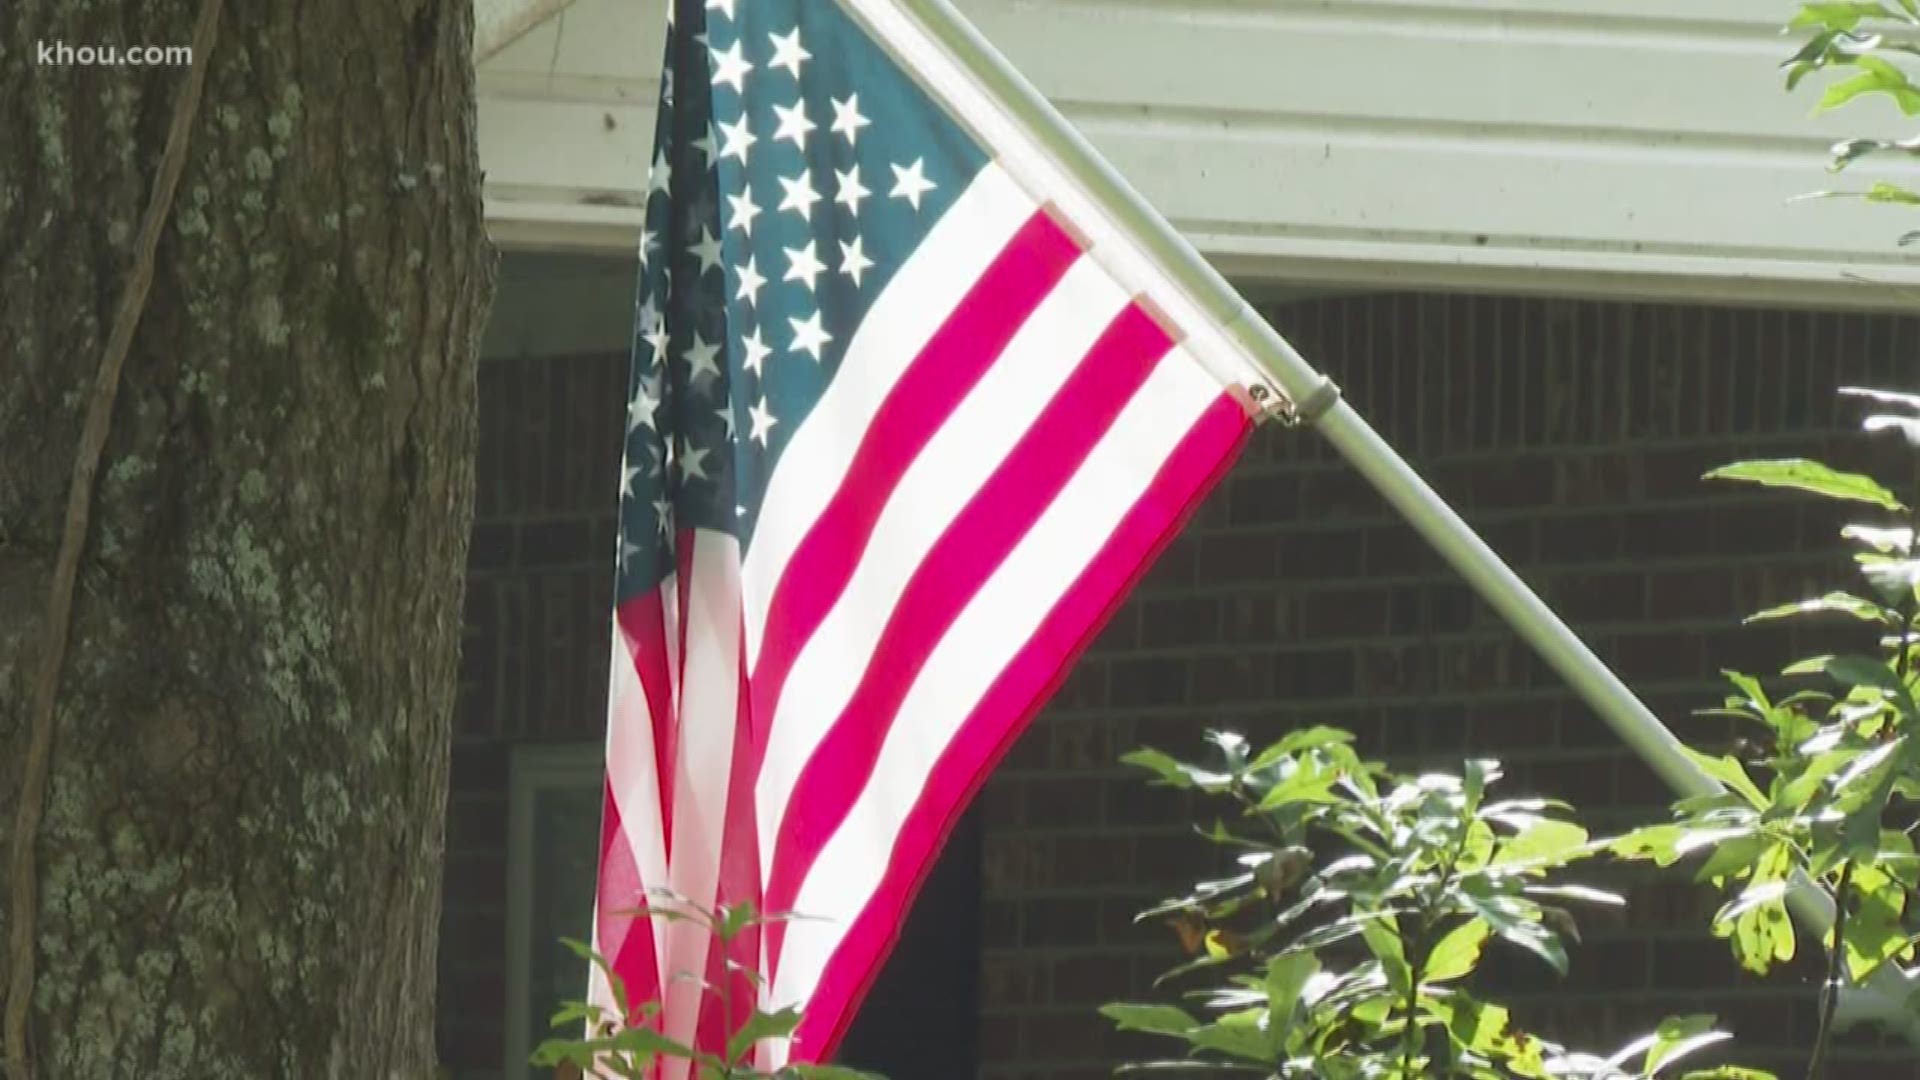 Fourth of July brings out the American spirit in all of us and one Baytown couple is showing their love for this country and the men in their lives who have served in the military in a simple but very special way.